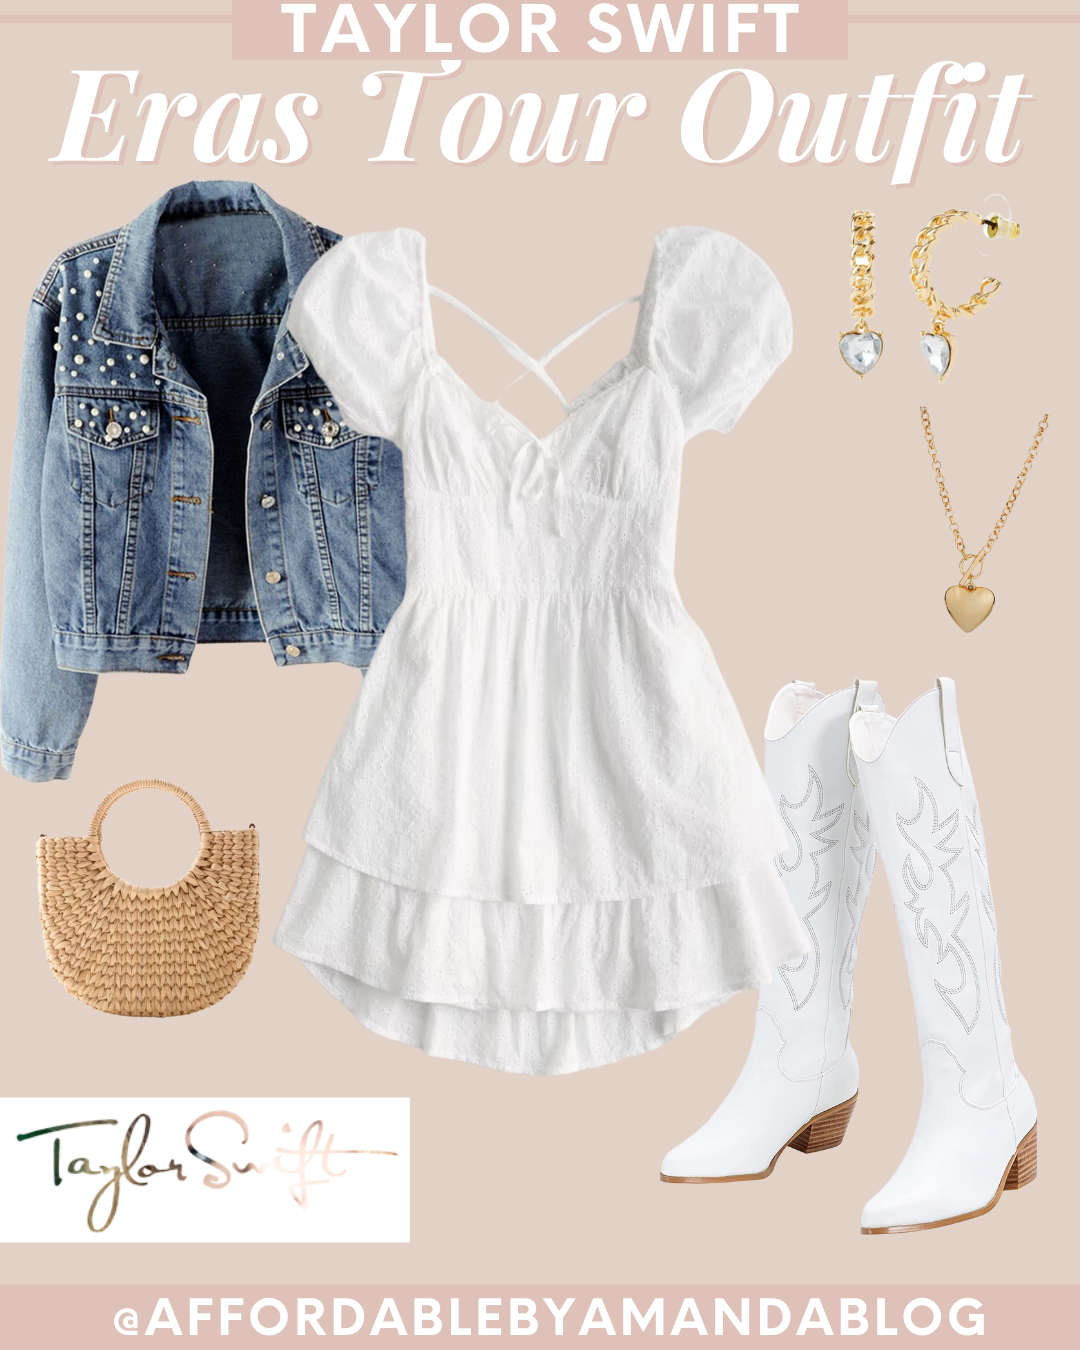 What to Wear to Taylor Swift